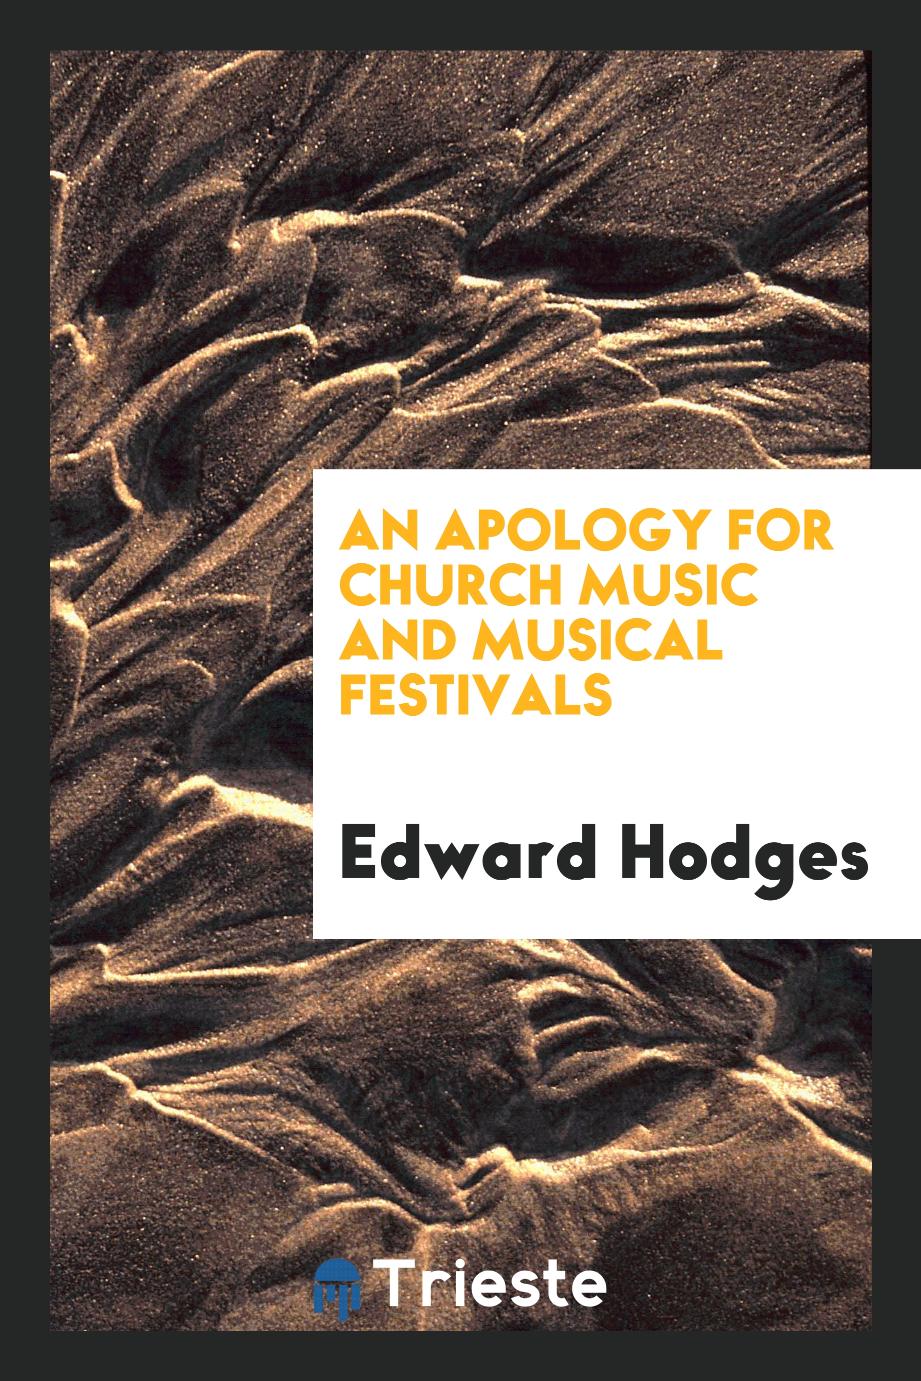 An apology for Church music and musical festivals